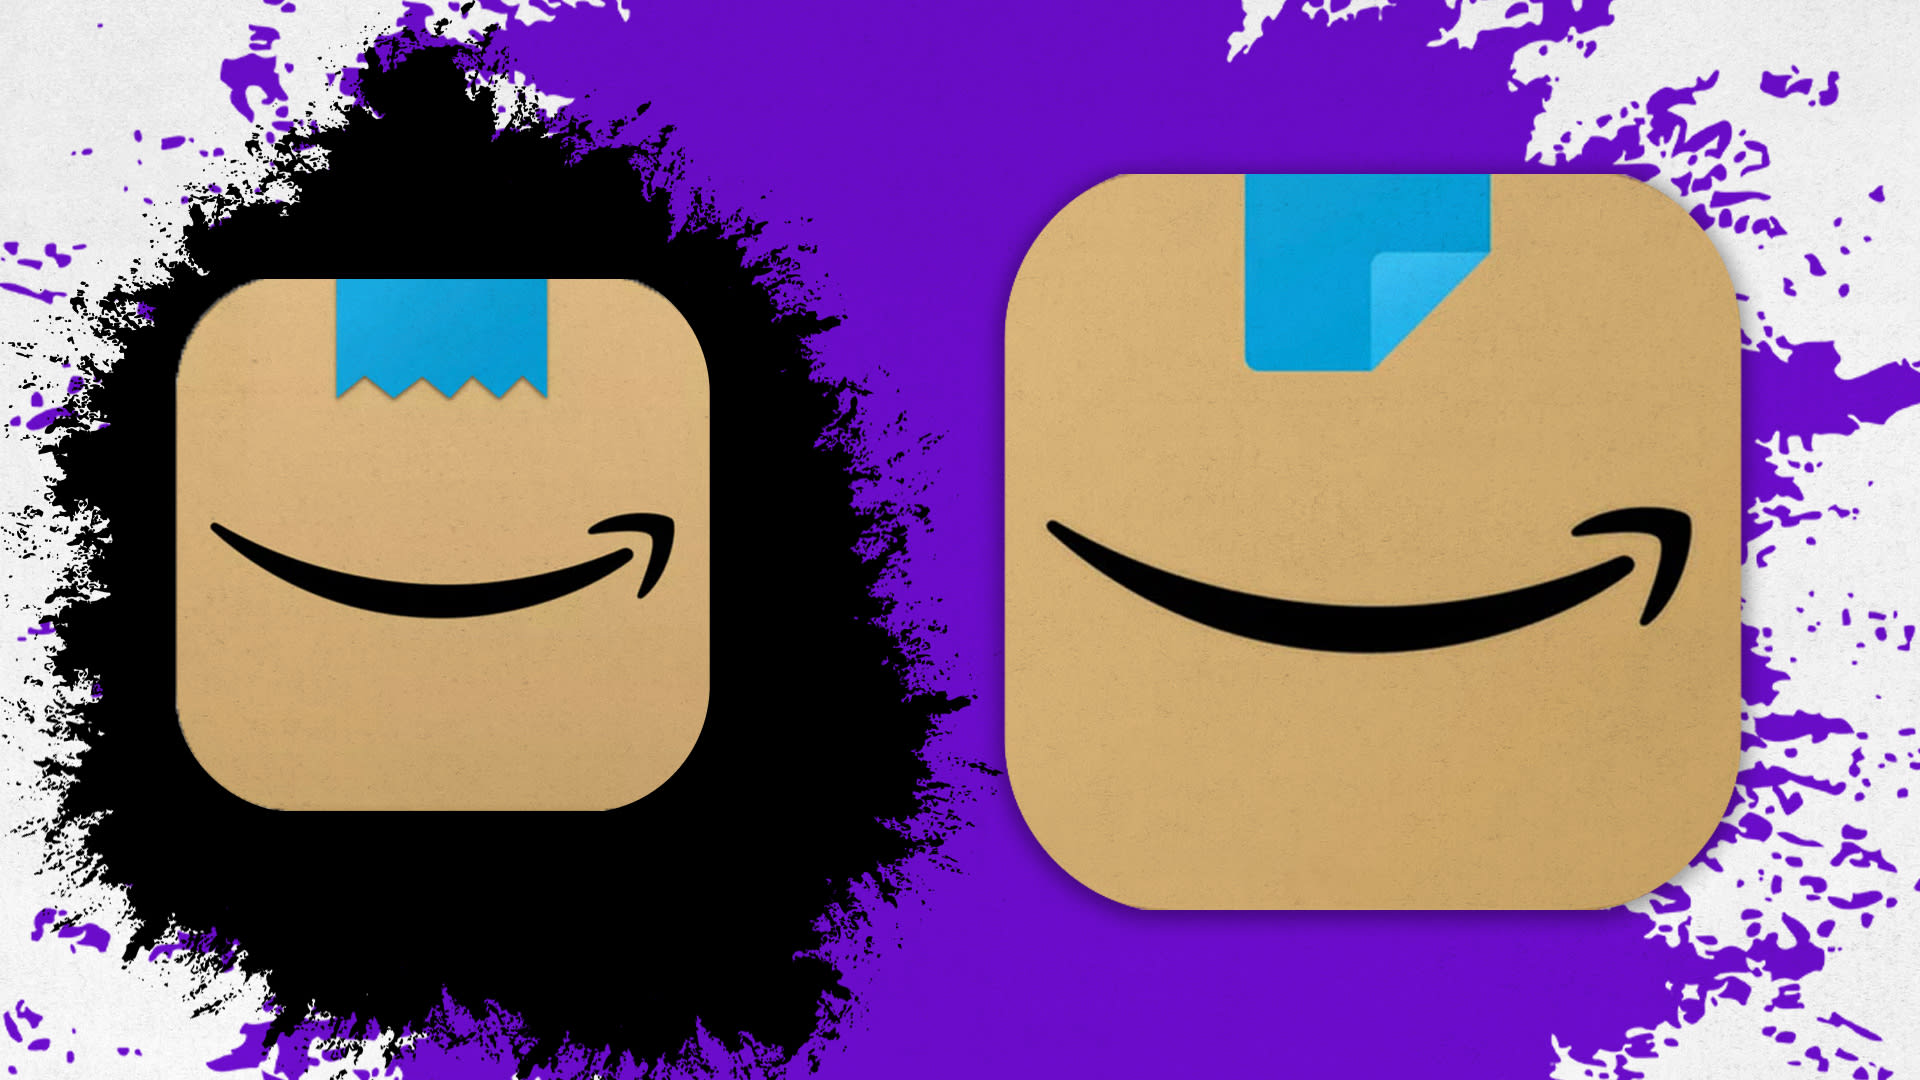 Whoops: Amazon quietly changes app icon after Hitler comparisons